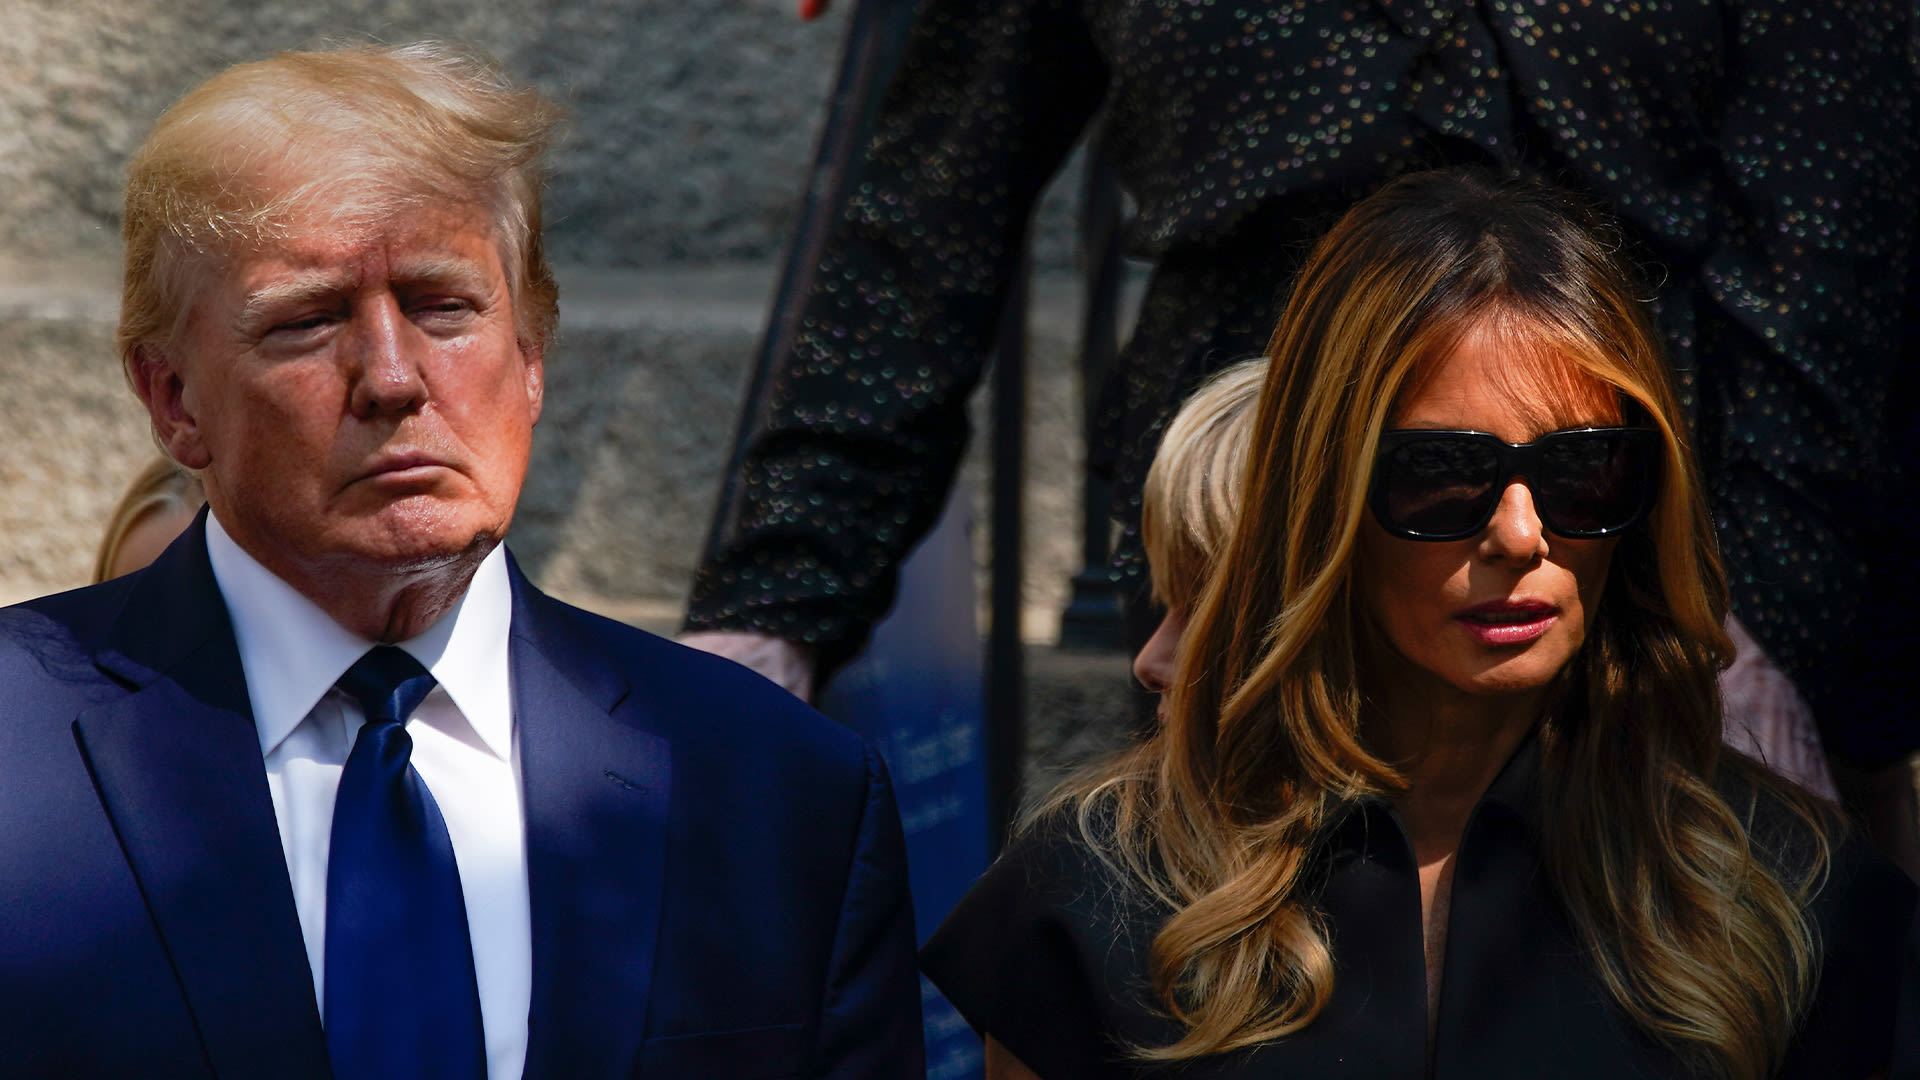 Donald Trump shares heartwarming message about wife Melania on her 54th birthday